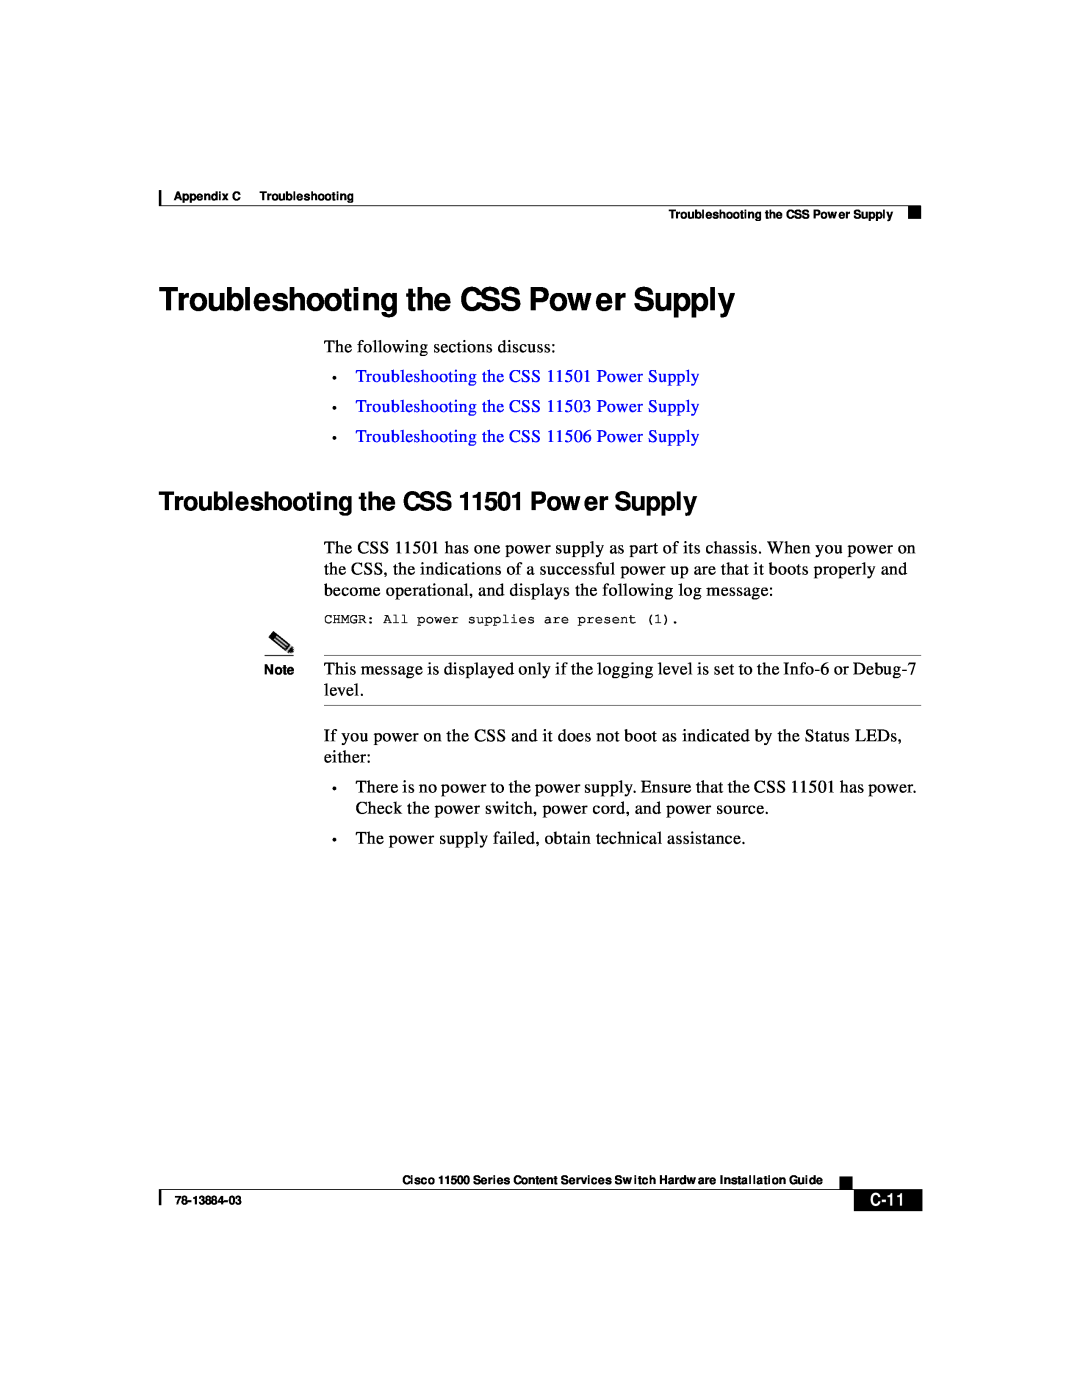 Cisco Systems 11500 Series manual Troubleshooting the CSS Power Supply, Troubleshooting the CSS 11501 Power Supply, C-11 